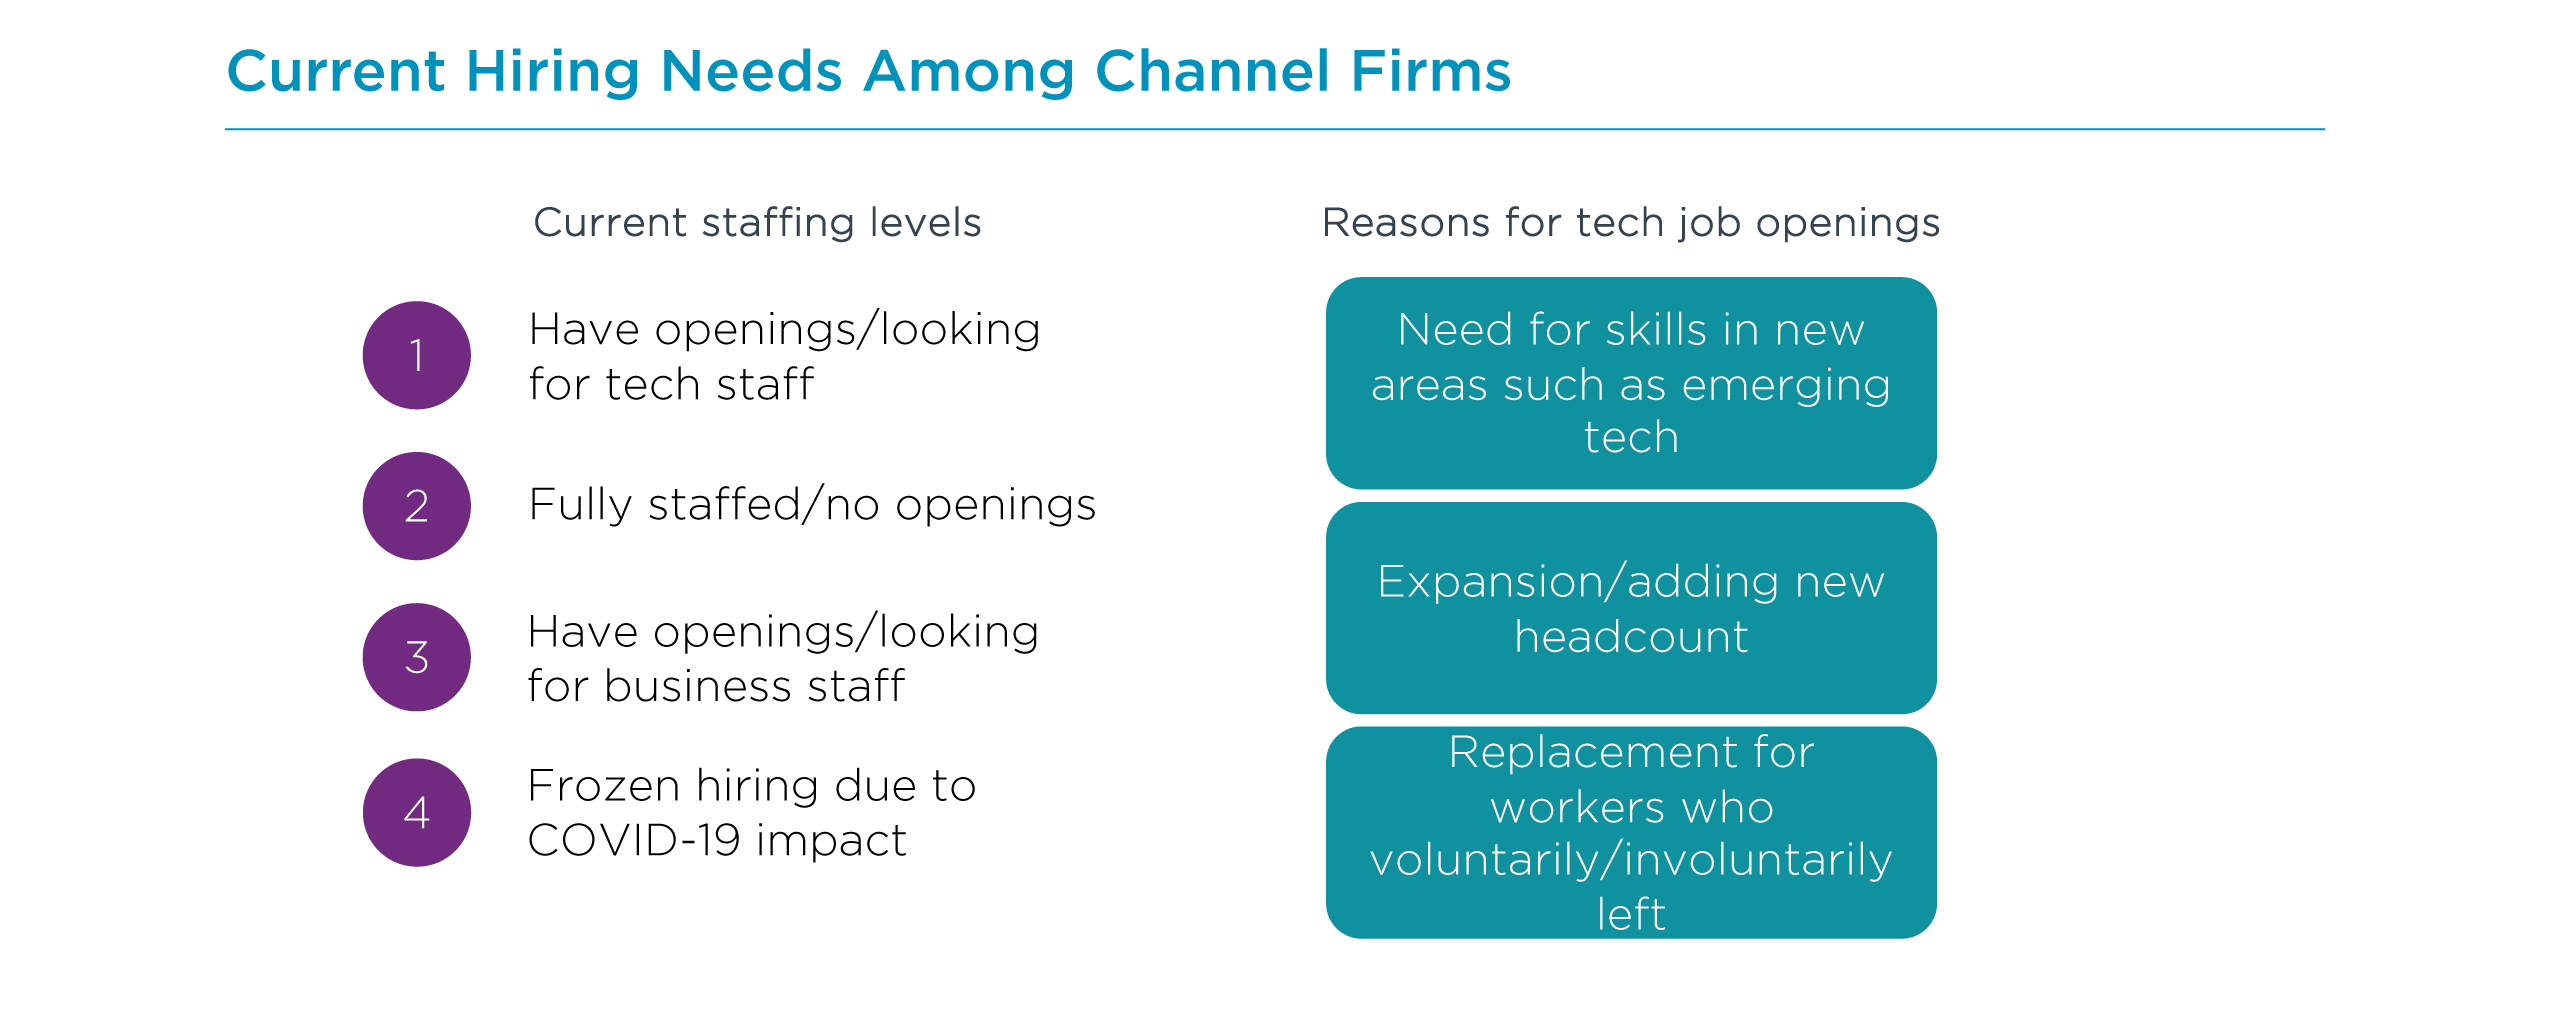 Current Hiring Needs Among Channel Firms